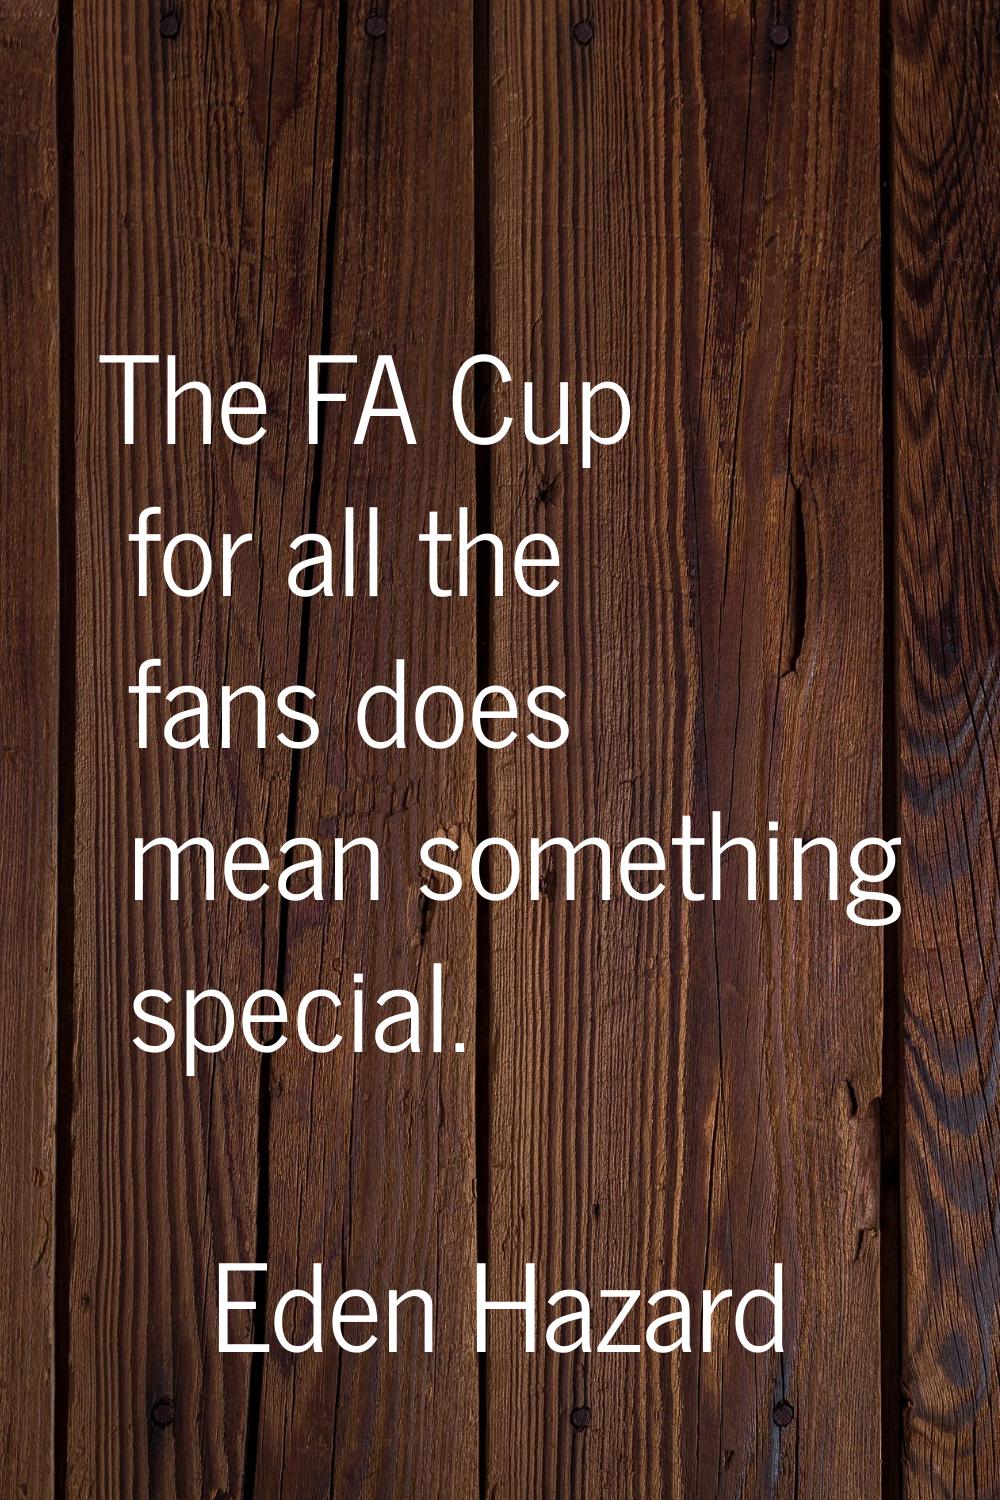 The FA Cup for all the fans does mean something special.